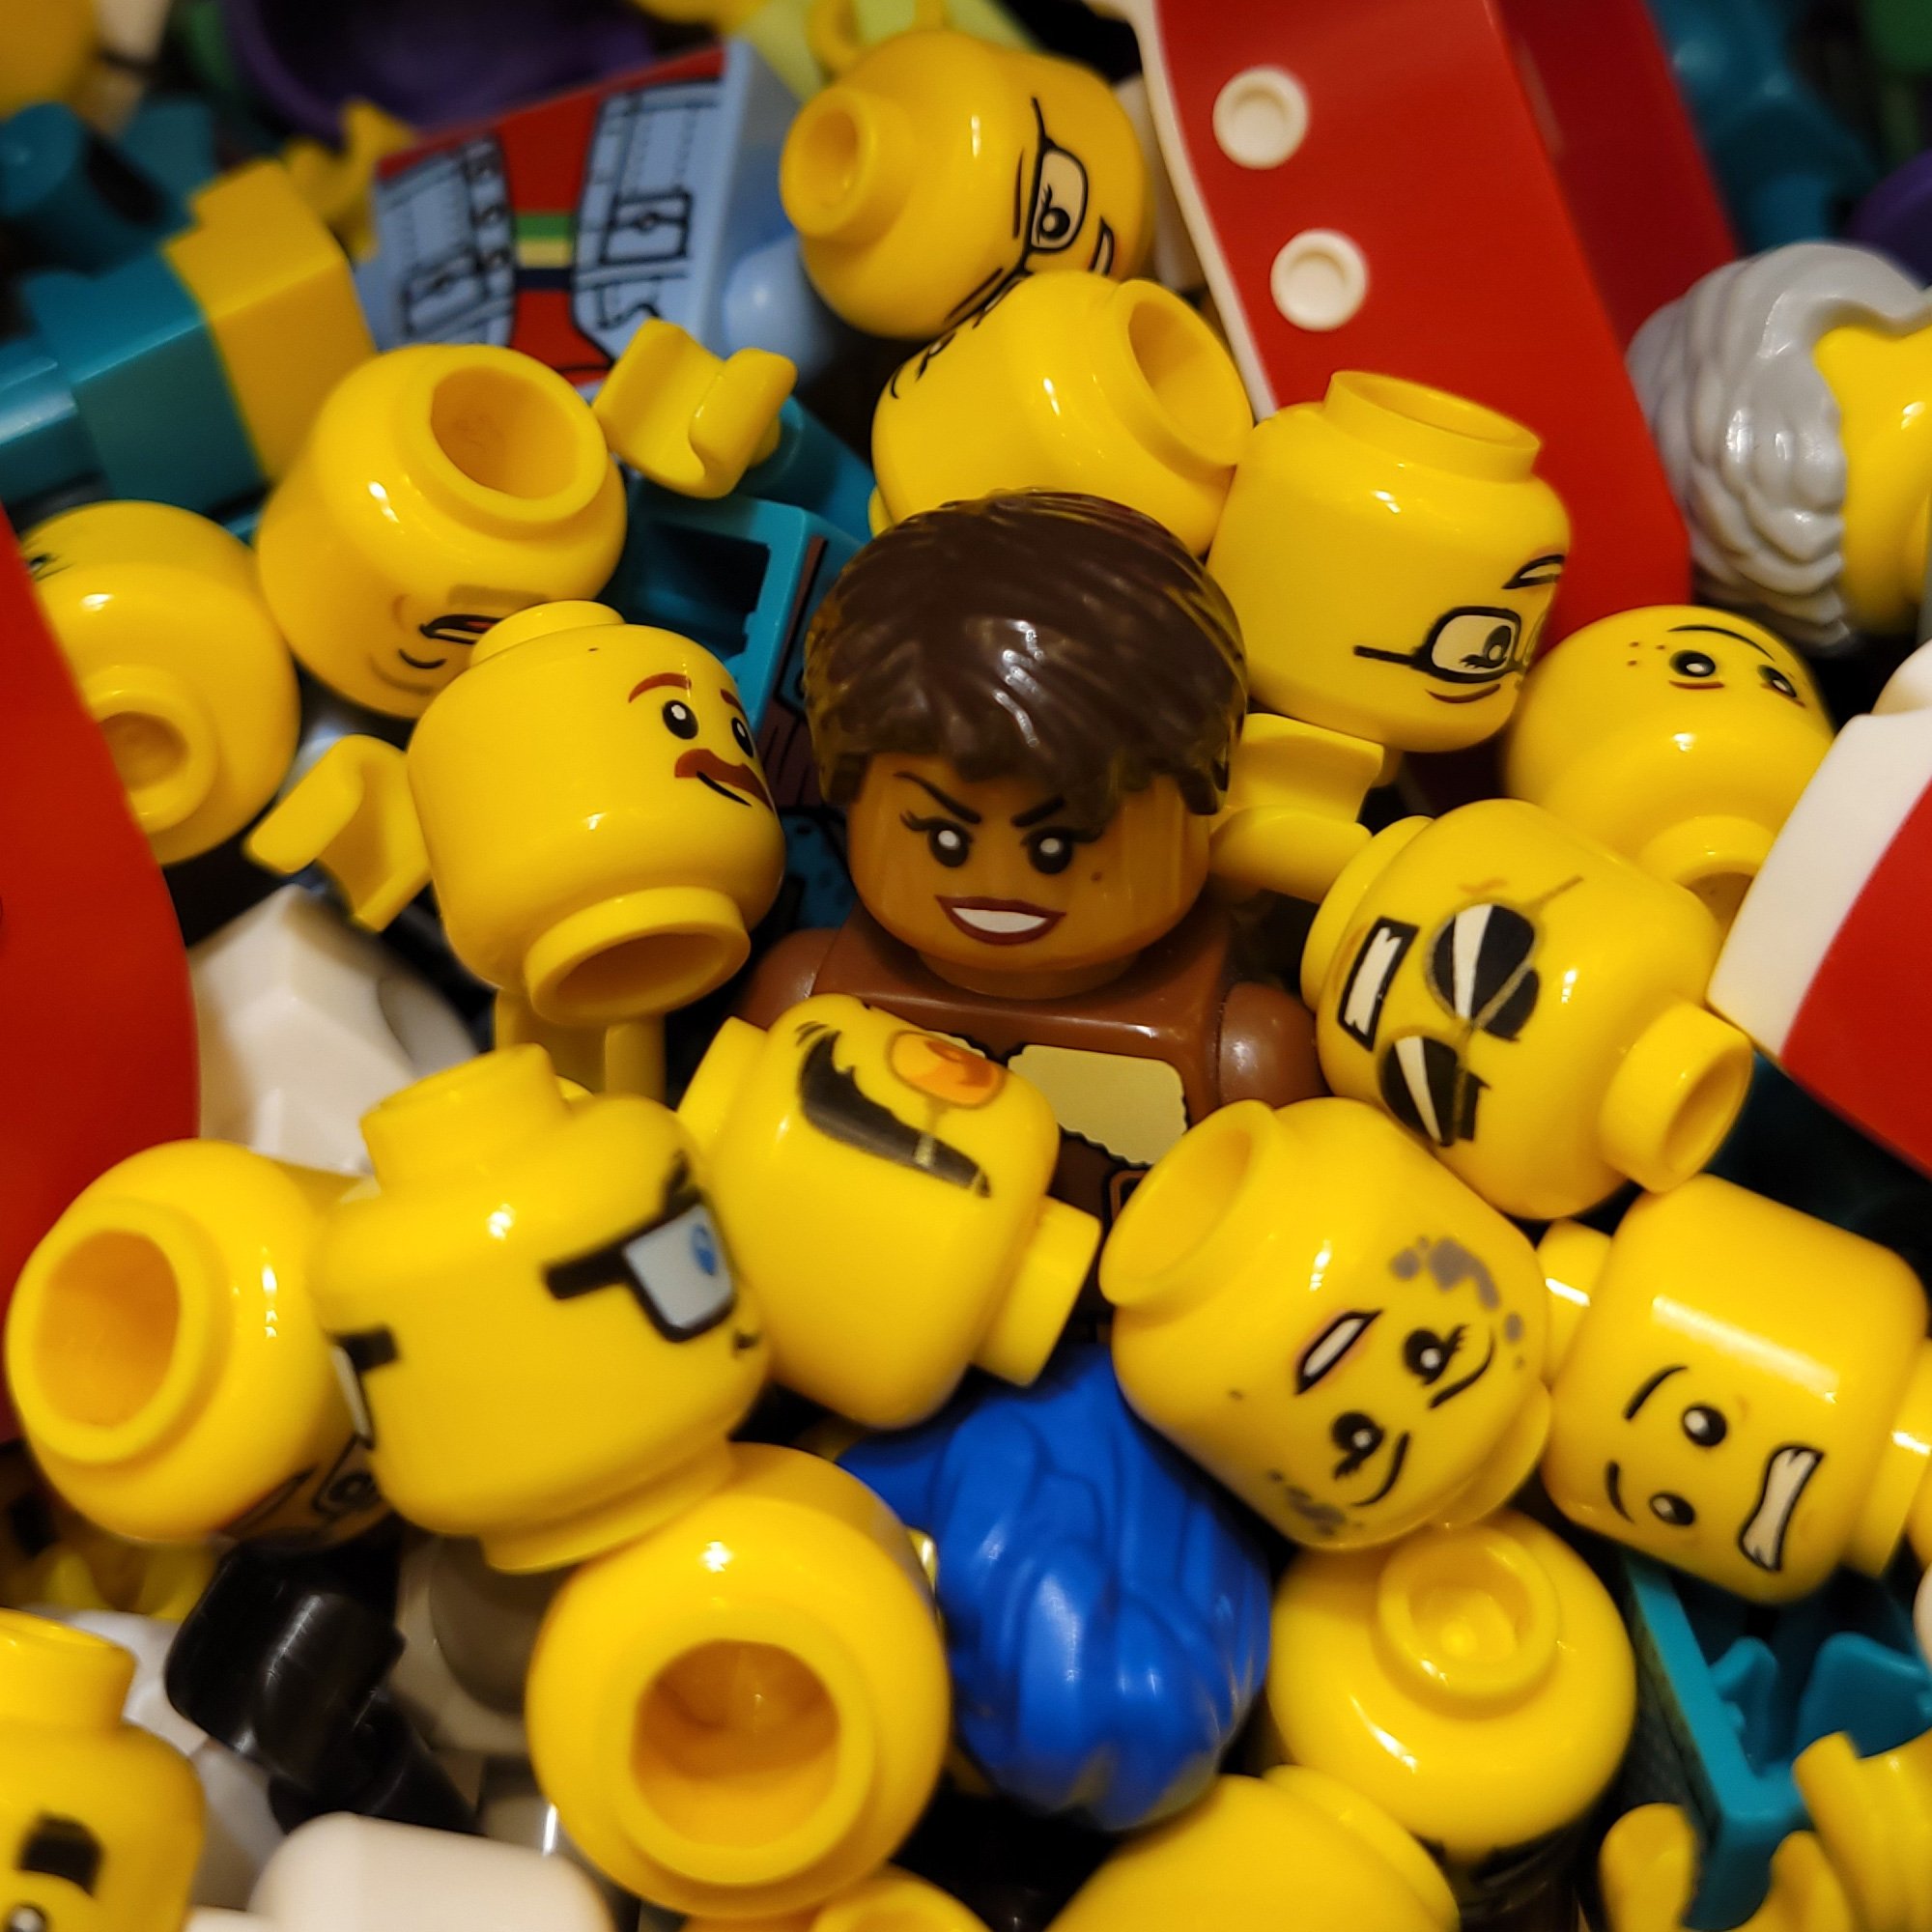 himmelsk uddannelse Marine Finding Myself in LEGO: The Struggle to Make a Black Sigfig - BrickNerd -  All things LEGO and the LEGO fan community